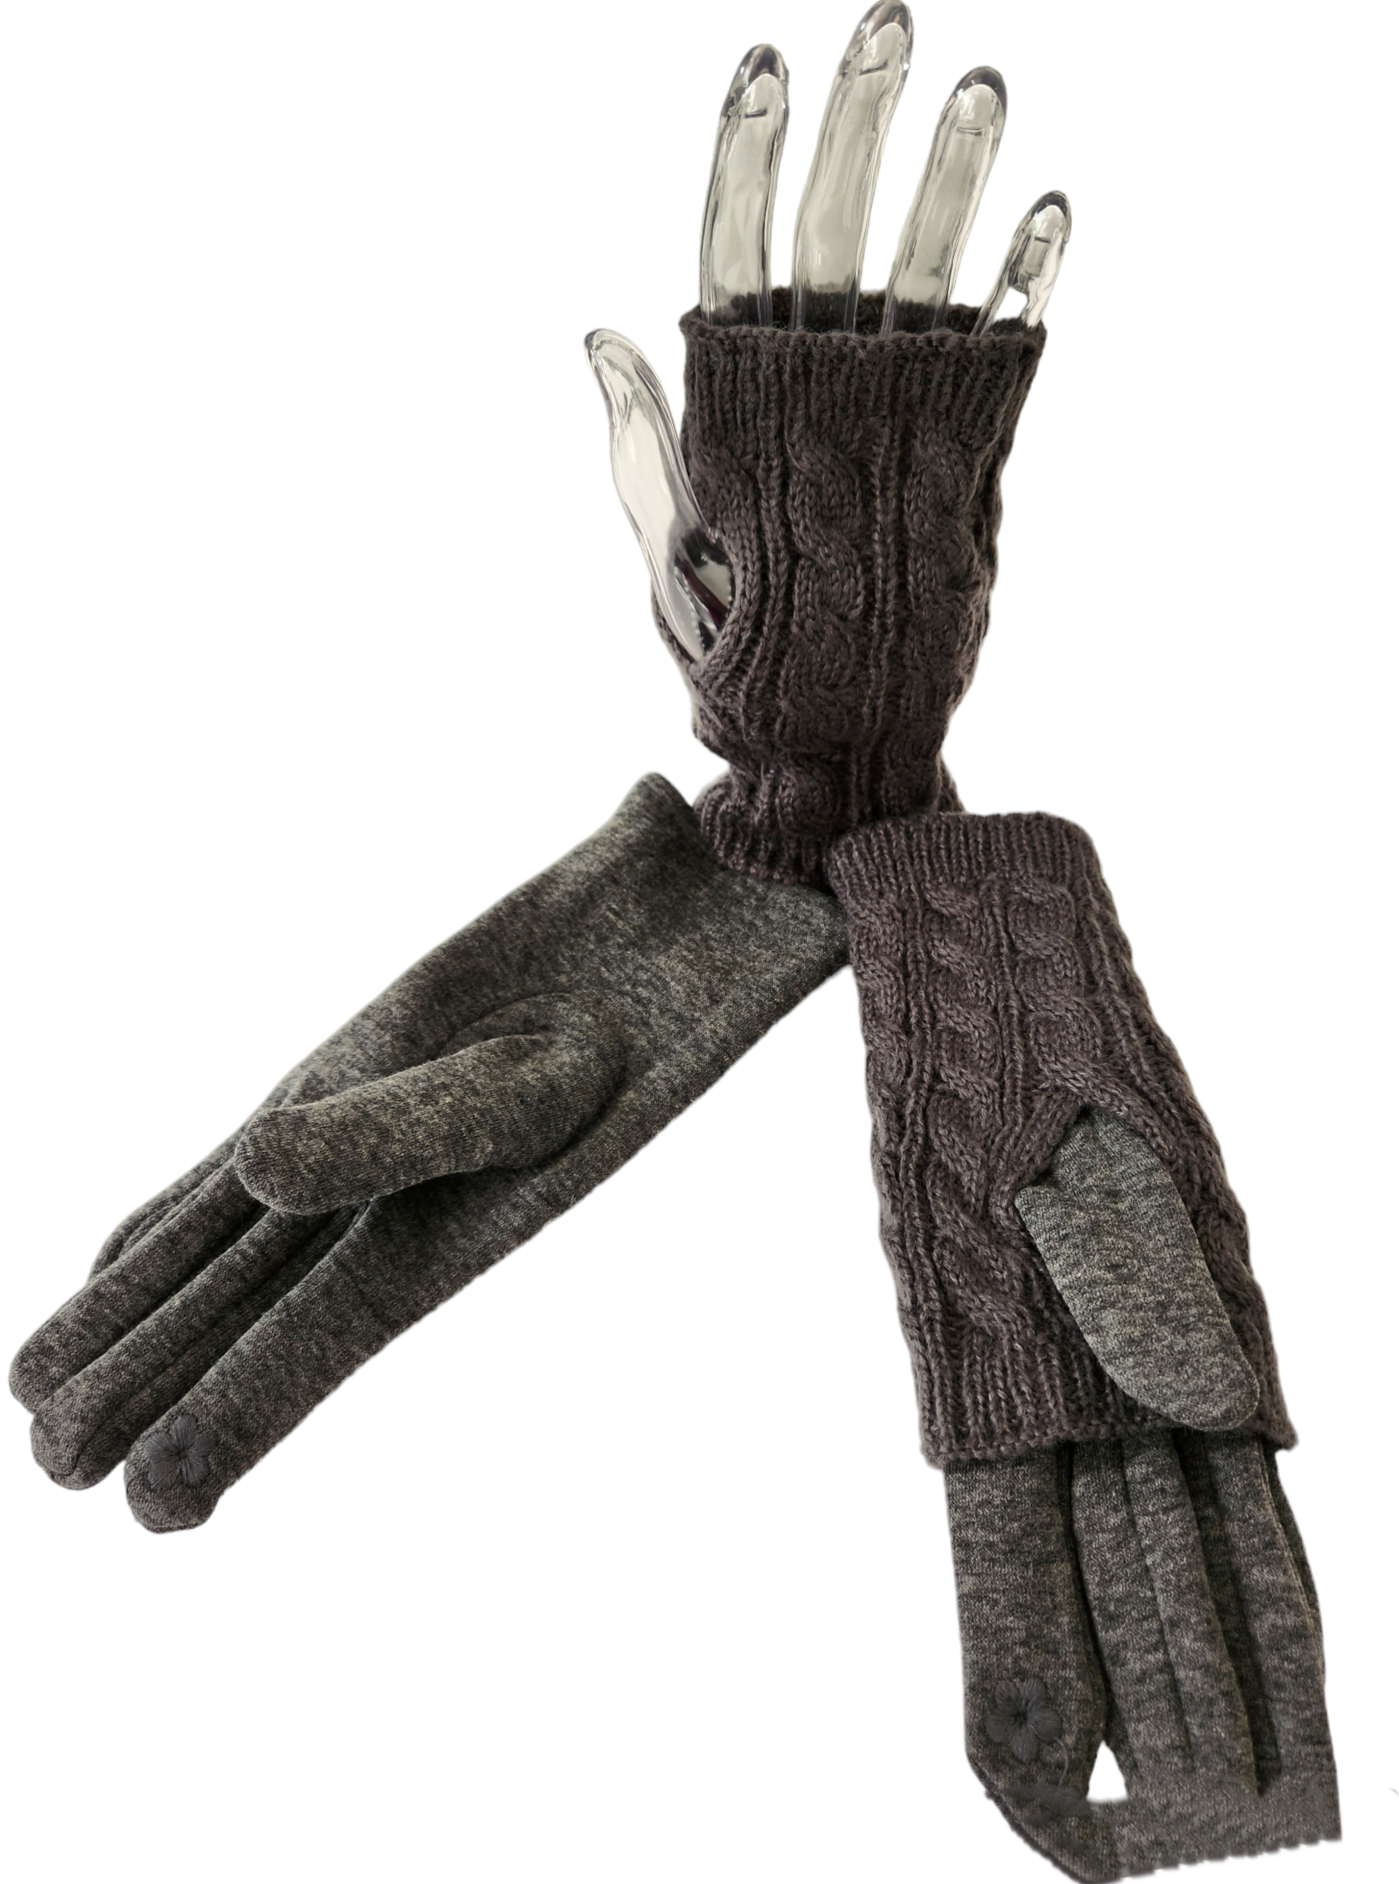 Women's Touch Screen Texting Gloves in Cable Knit and Furry Lining Comfort for Your Hands-13